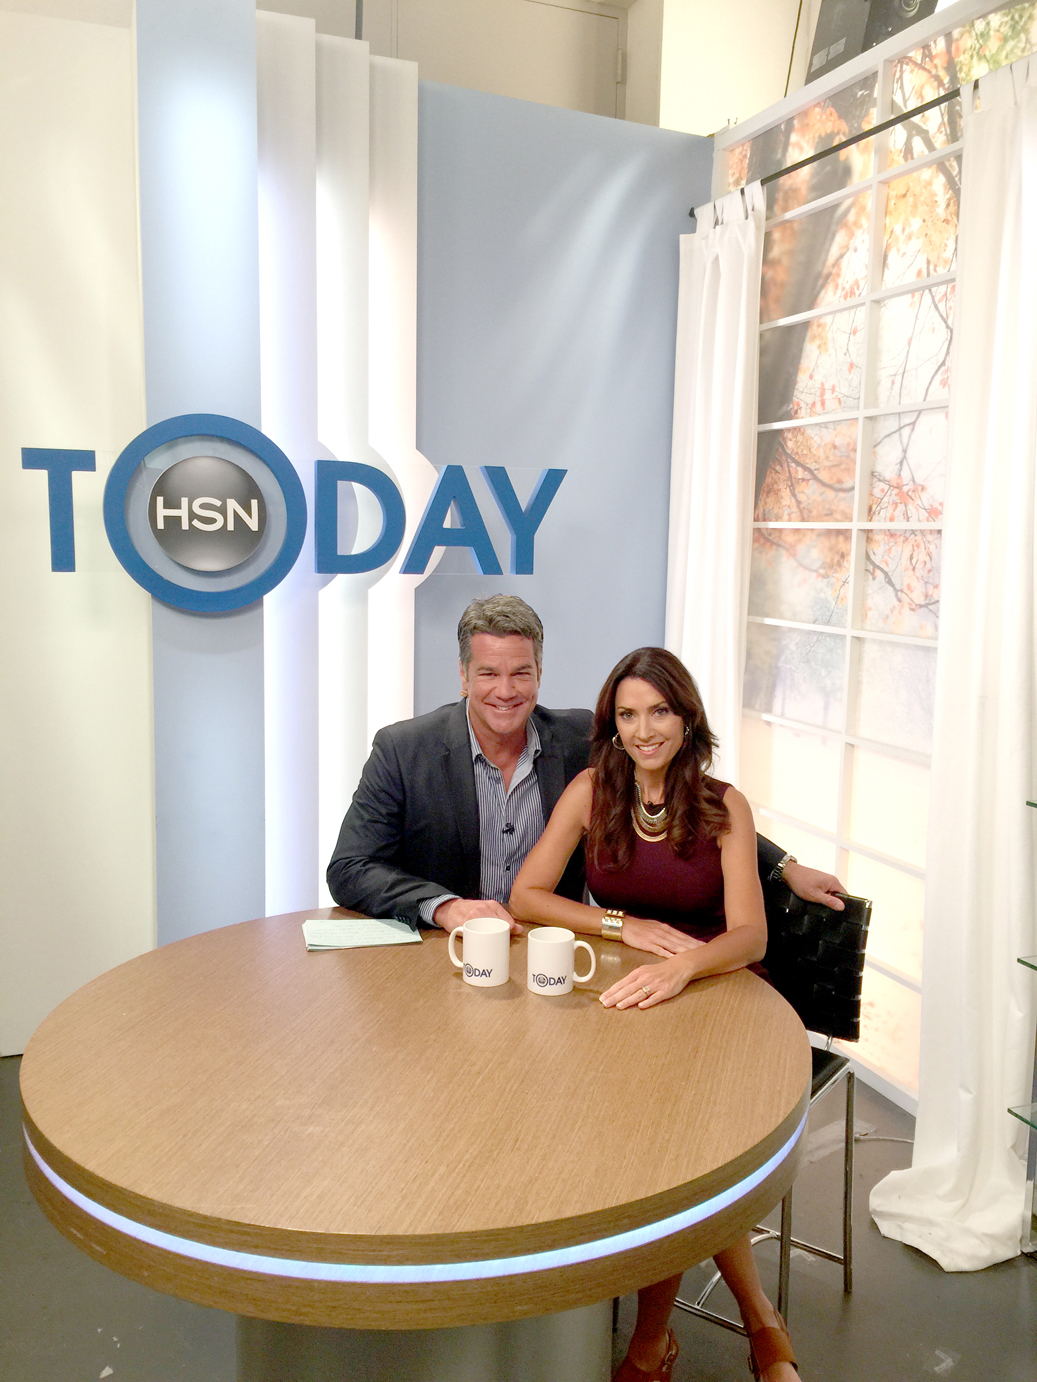 In addition to hosting her own show, LeBlanc serves as a décor expert on HSN .